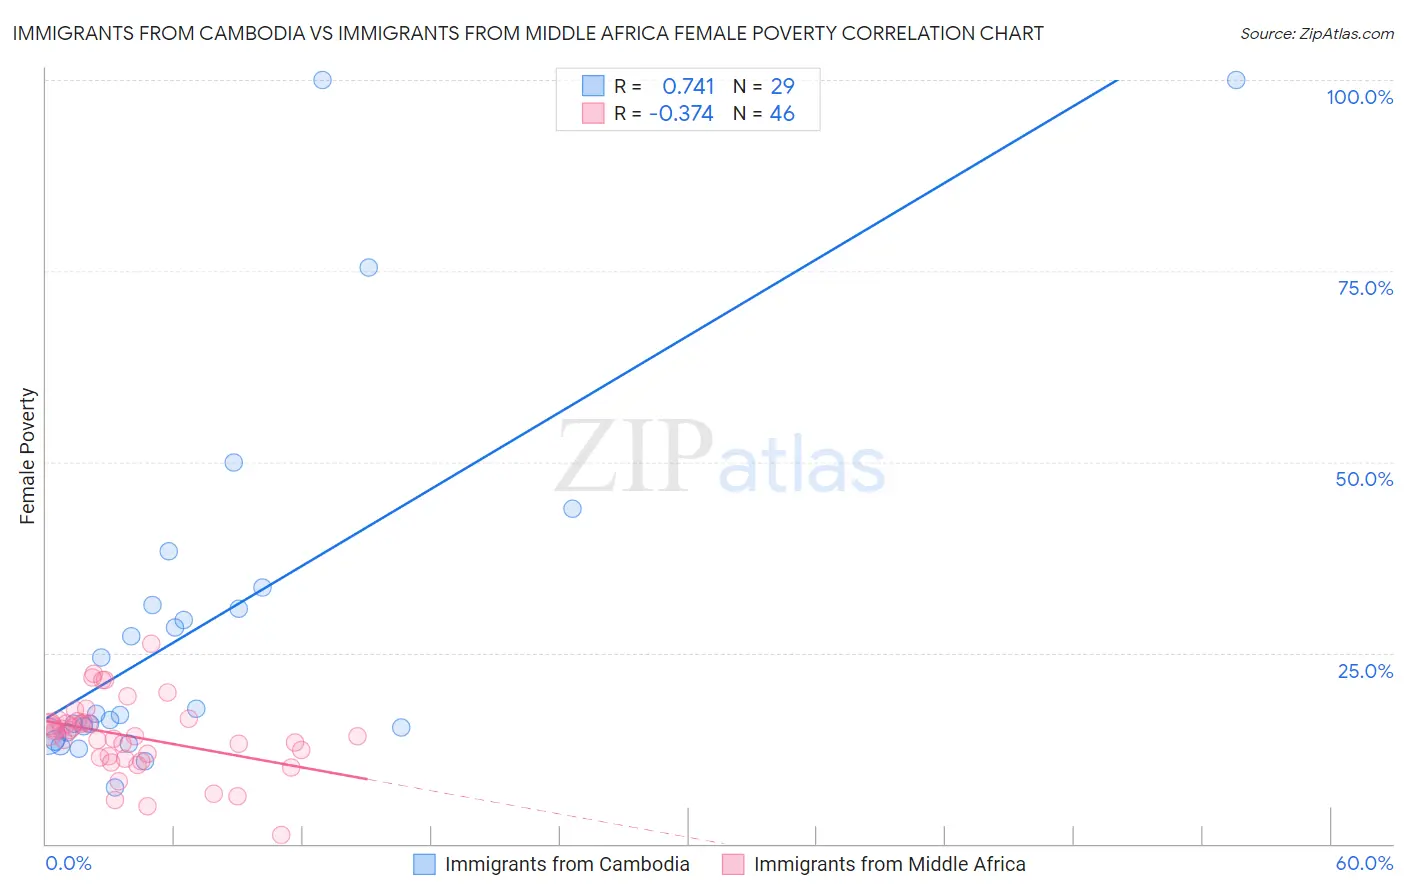 Immigrants from Cambodia vs Immigrants from Middle Africa Female Poverty